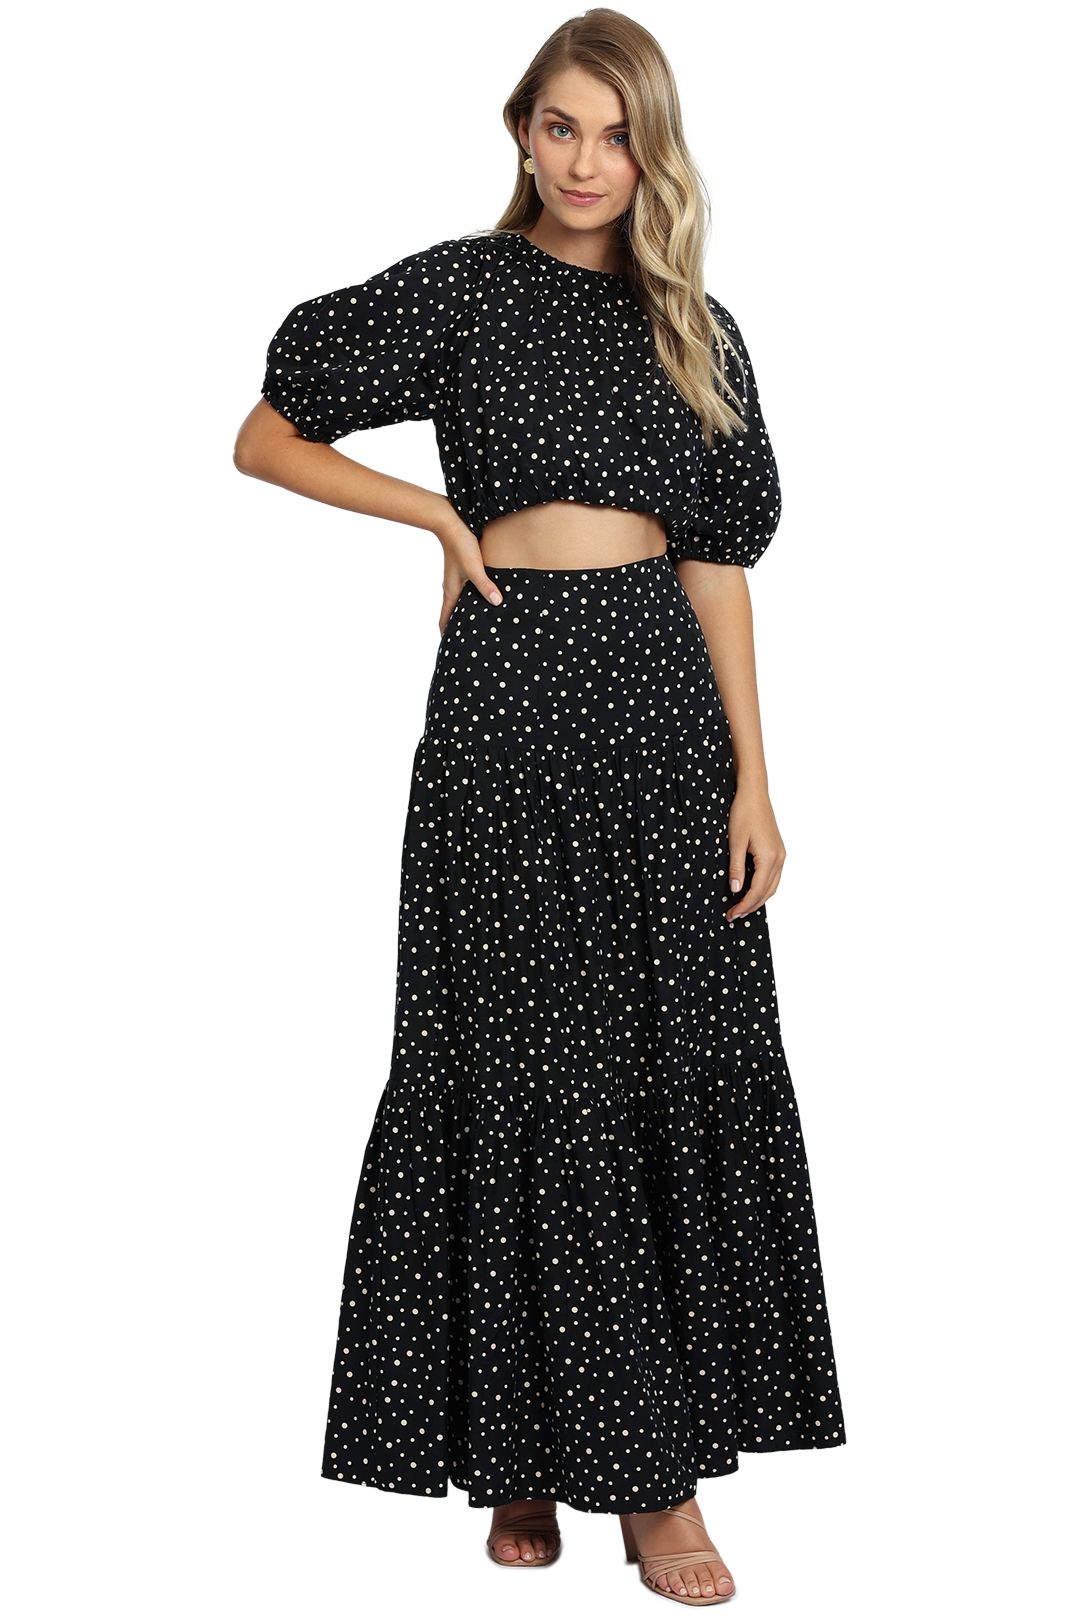 Significant Other Poppy Top and Skirt Set Black Cream Polka cropped maxi